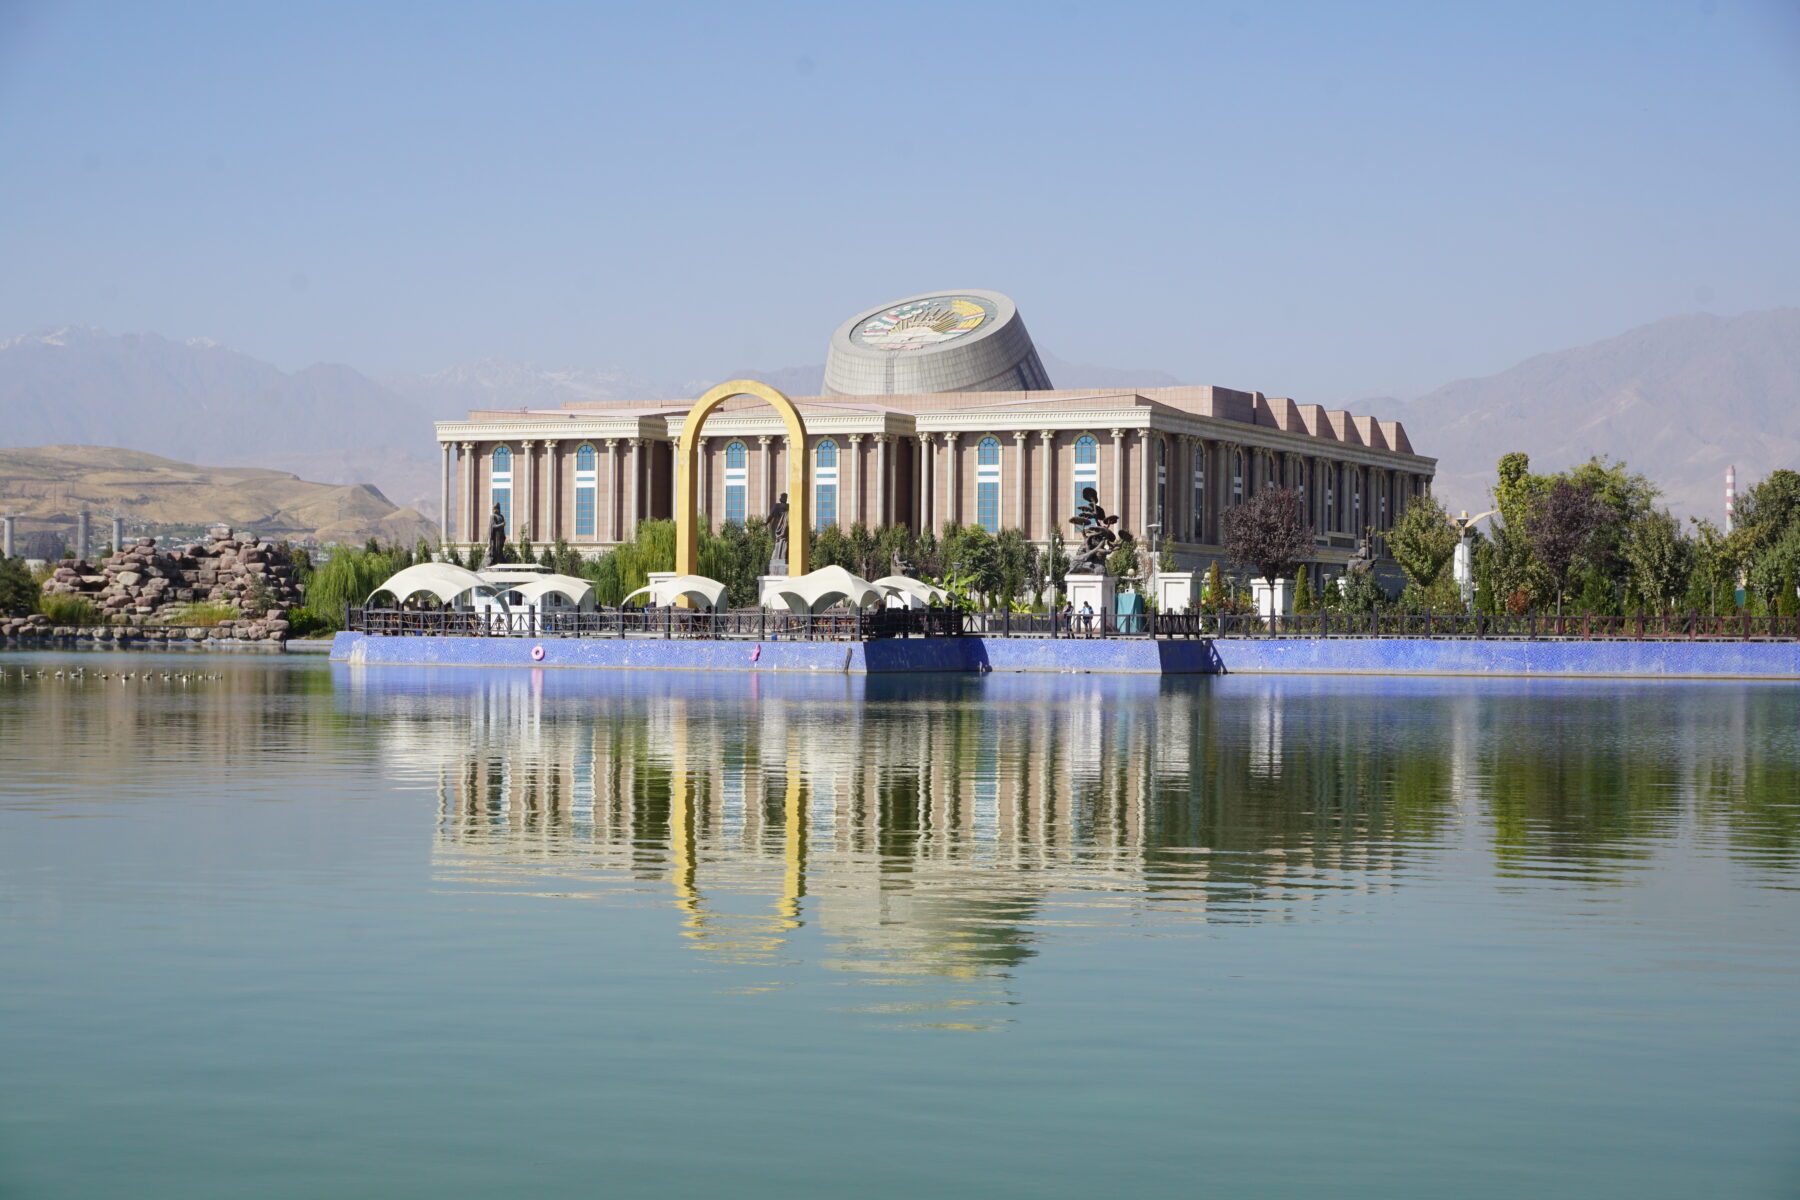 Dushanbe, National Museum Reflecting In Water